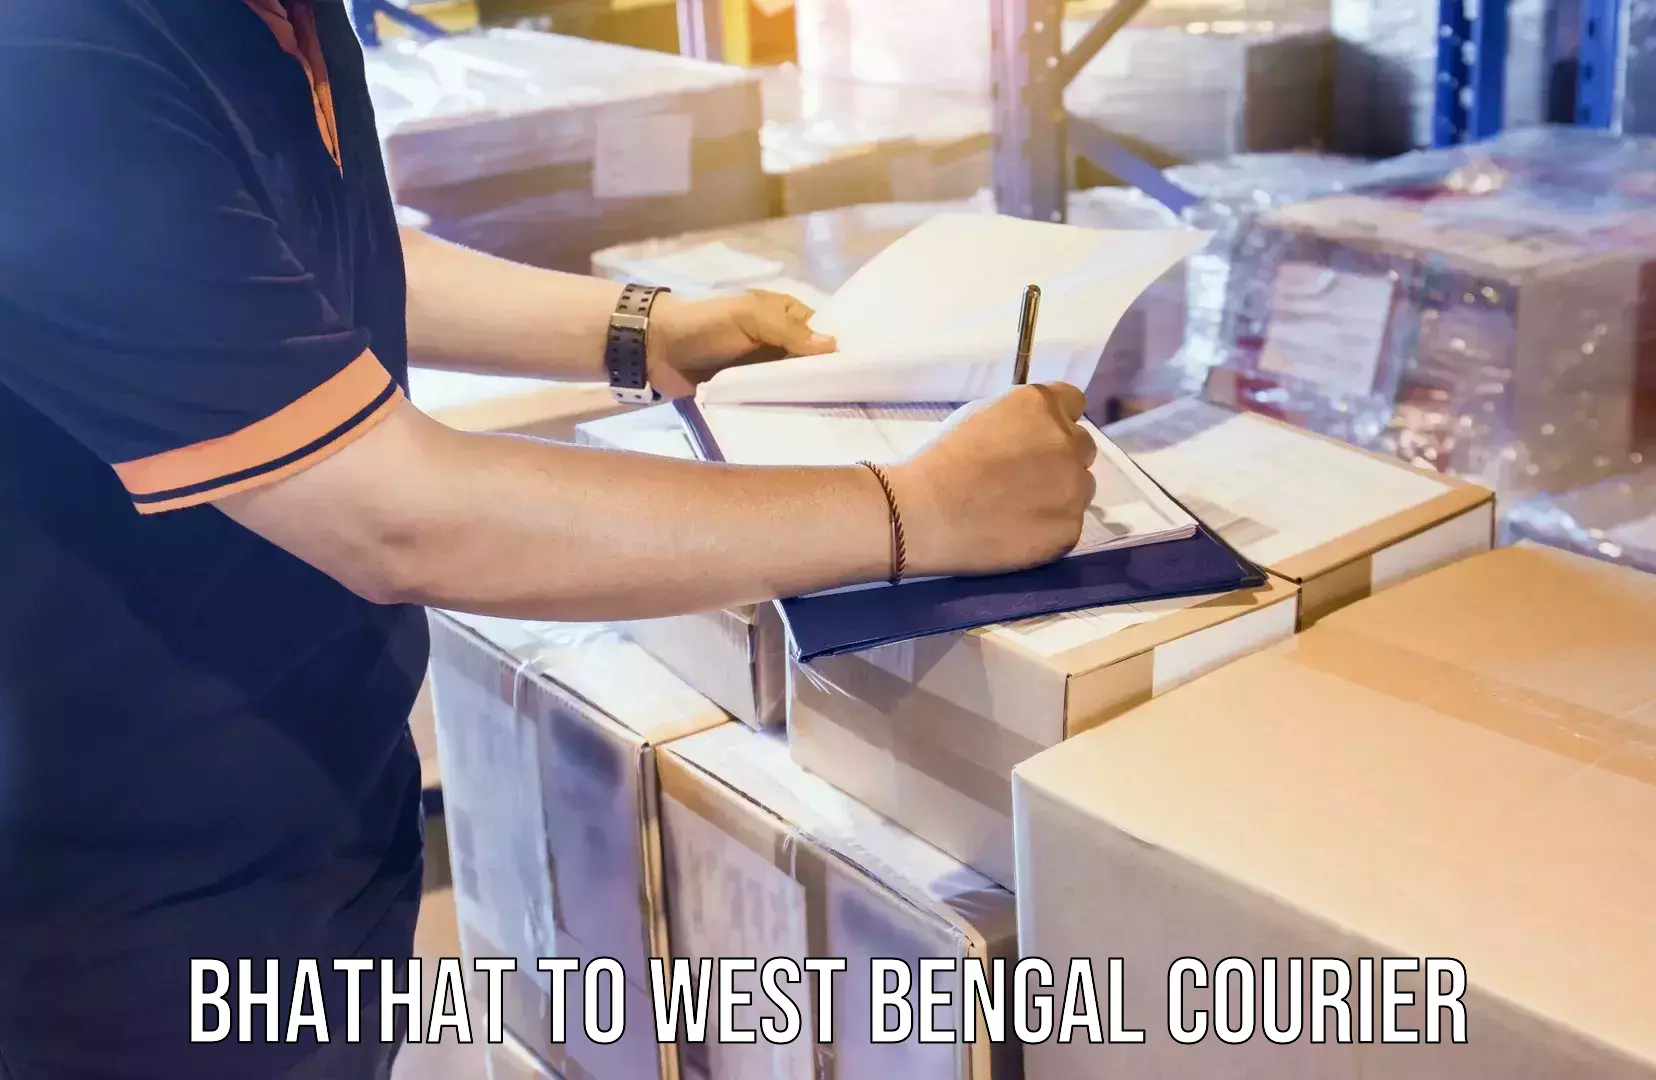 Global shipping networks Bhathat to West Bengal